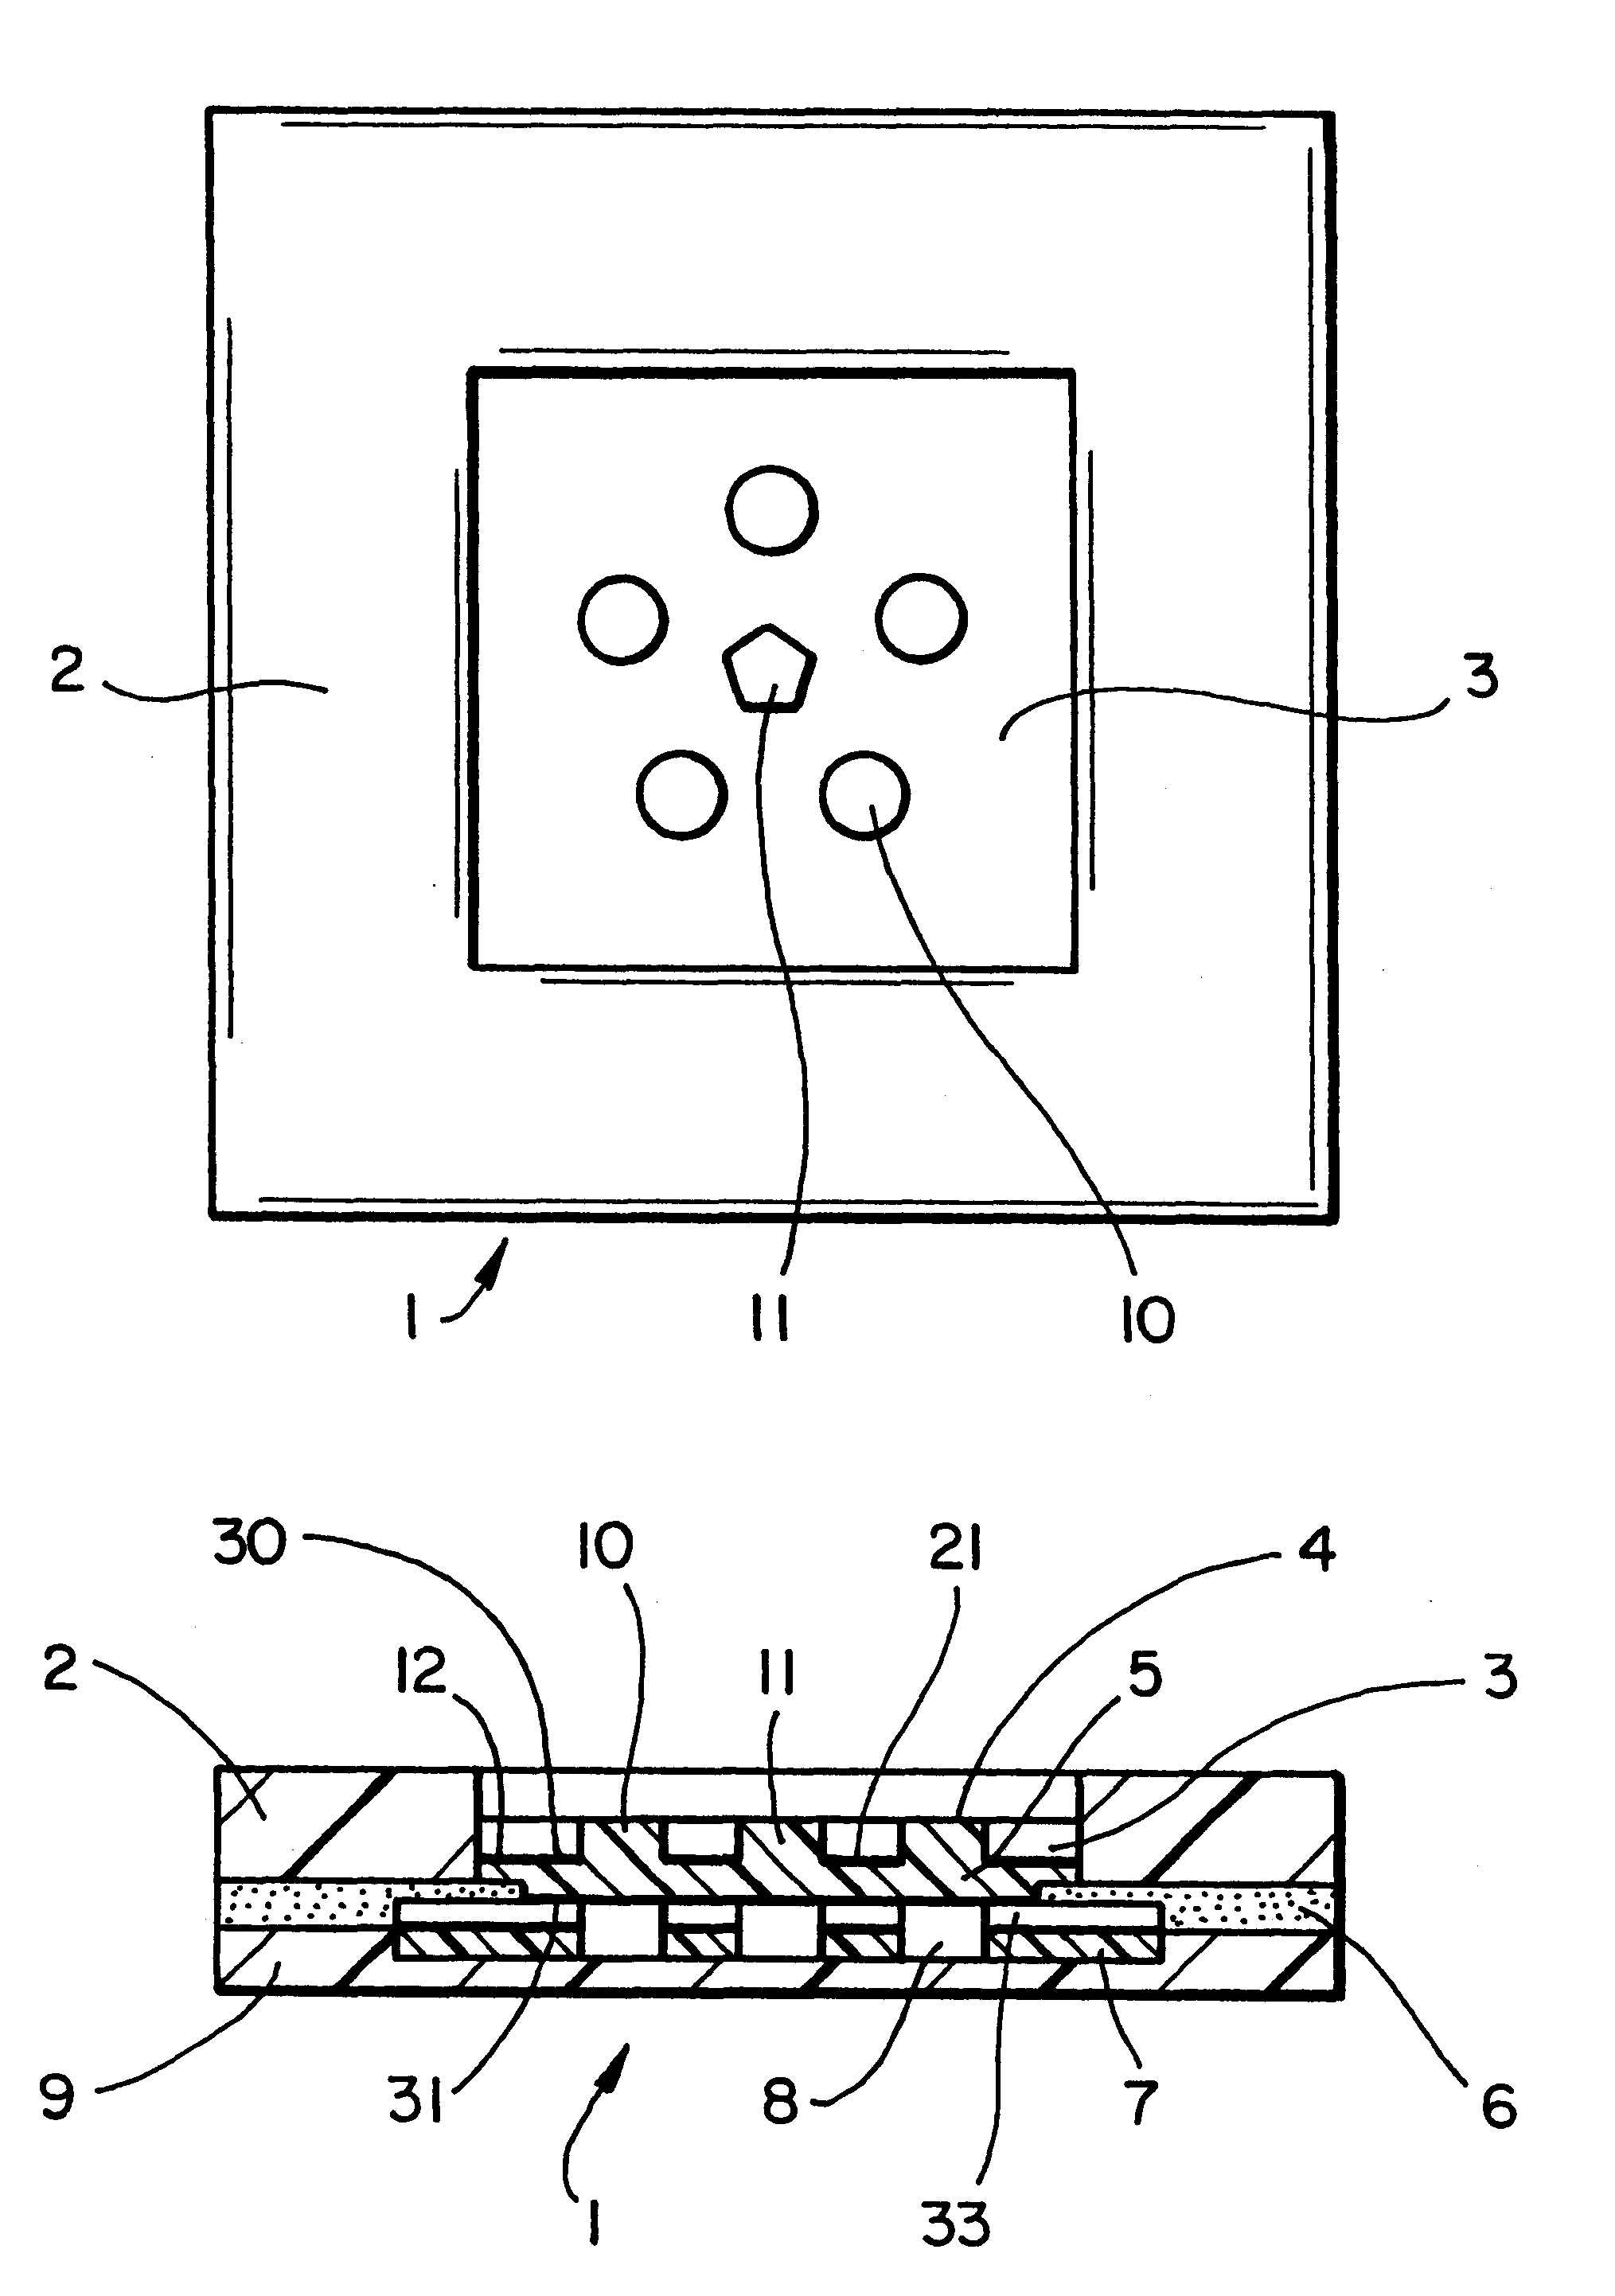 Interstitial fluid methods and devices for determination of an analyte in the body